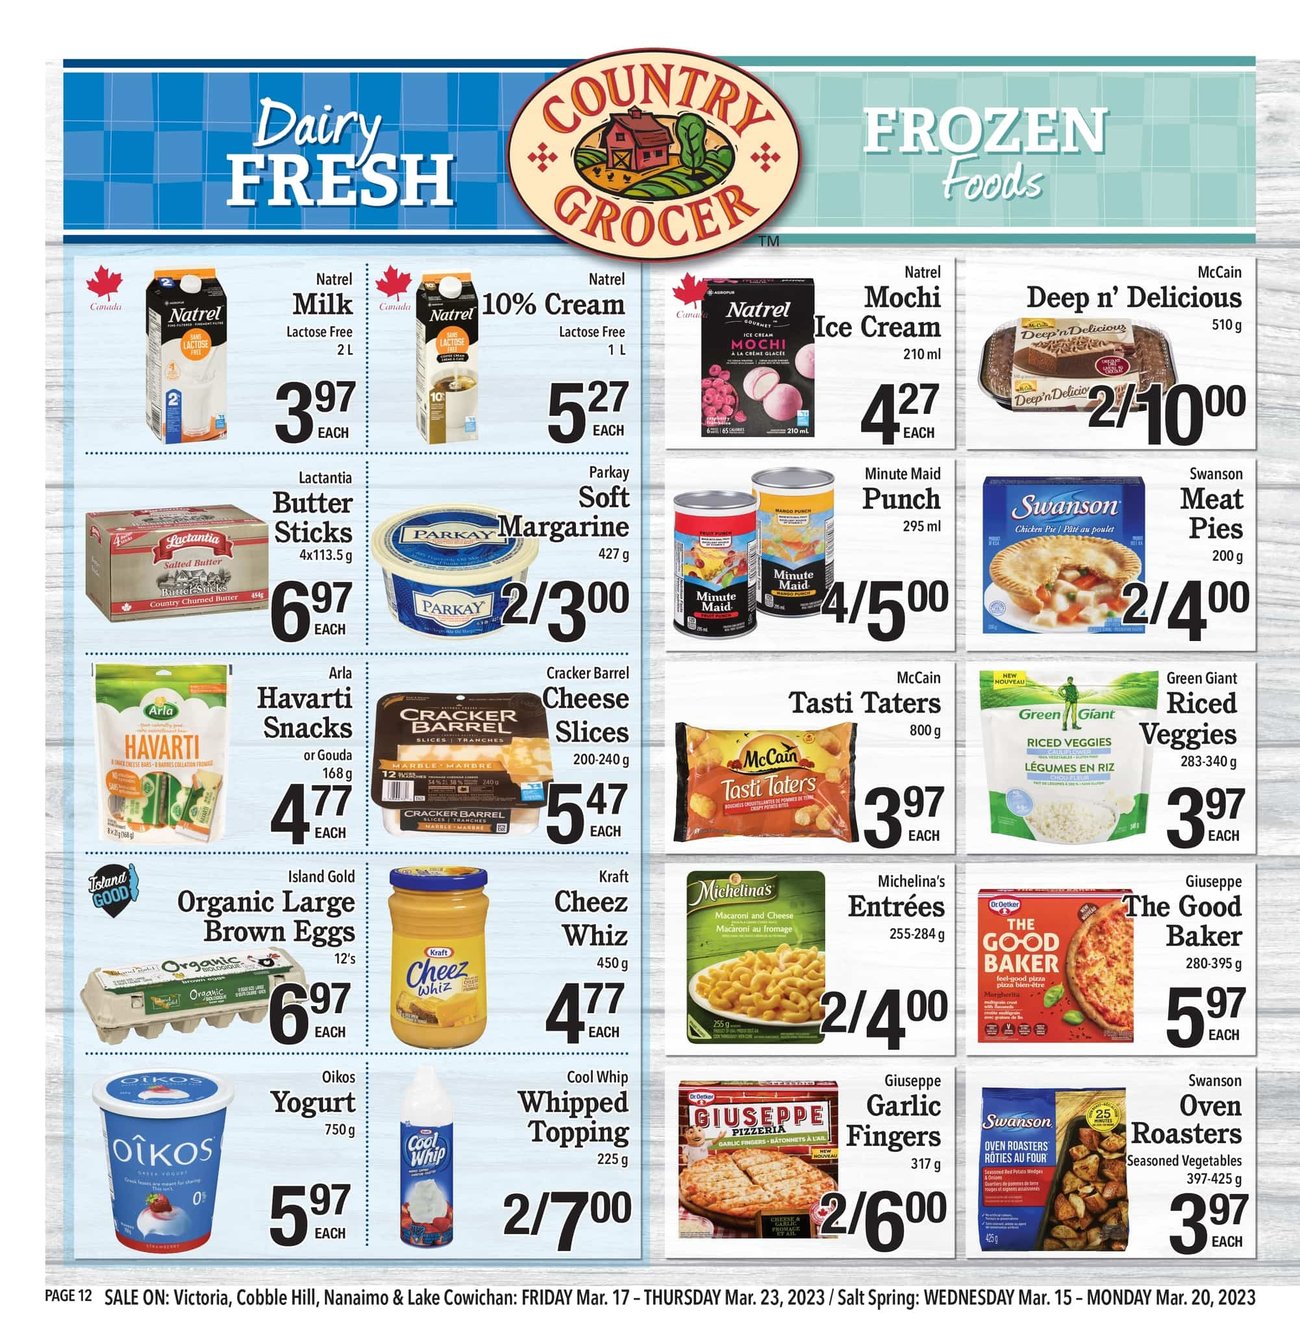 Country Grocer - Weekly Flyer Specials - Page 12